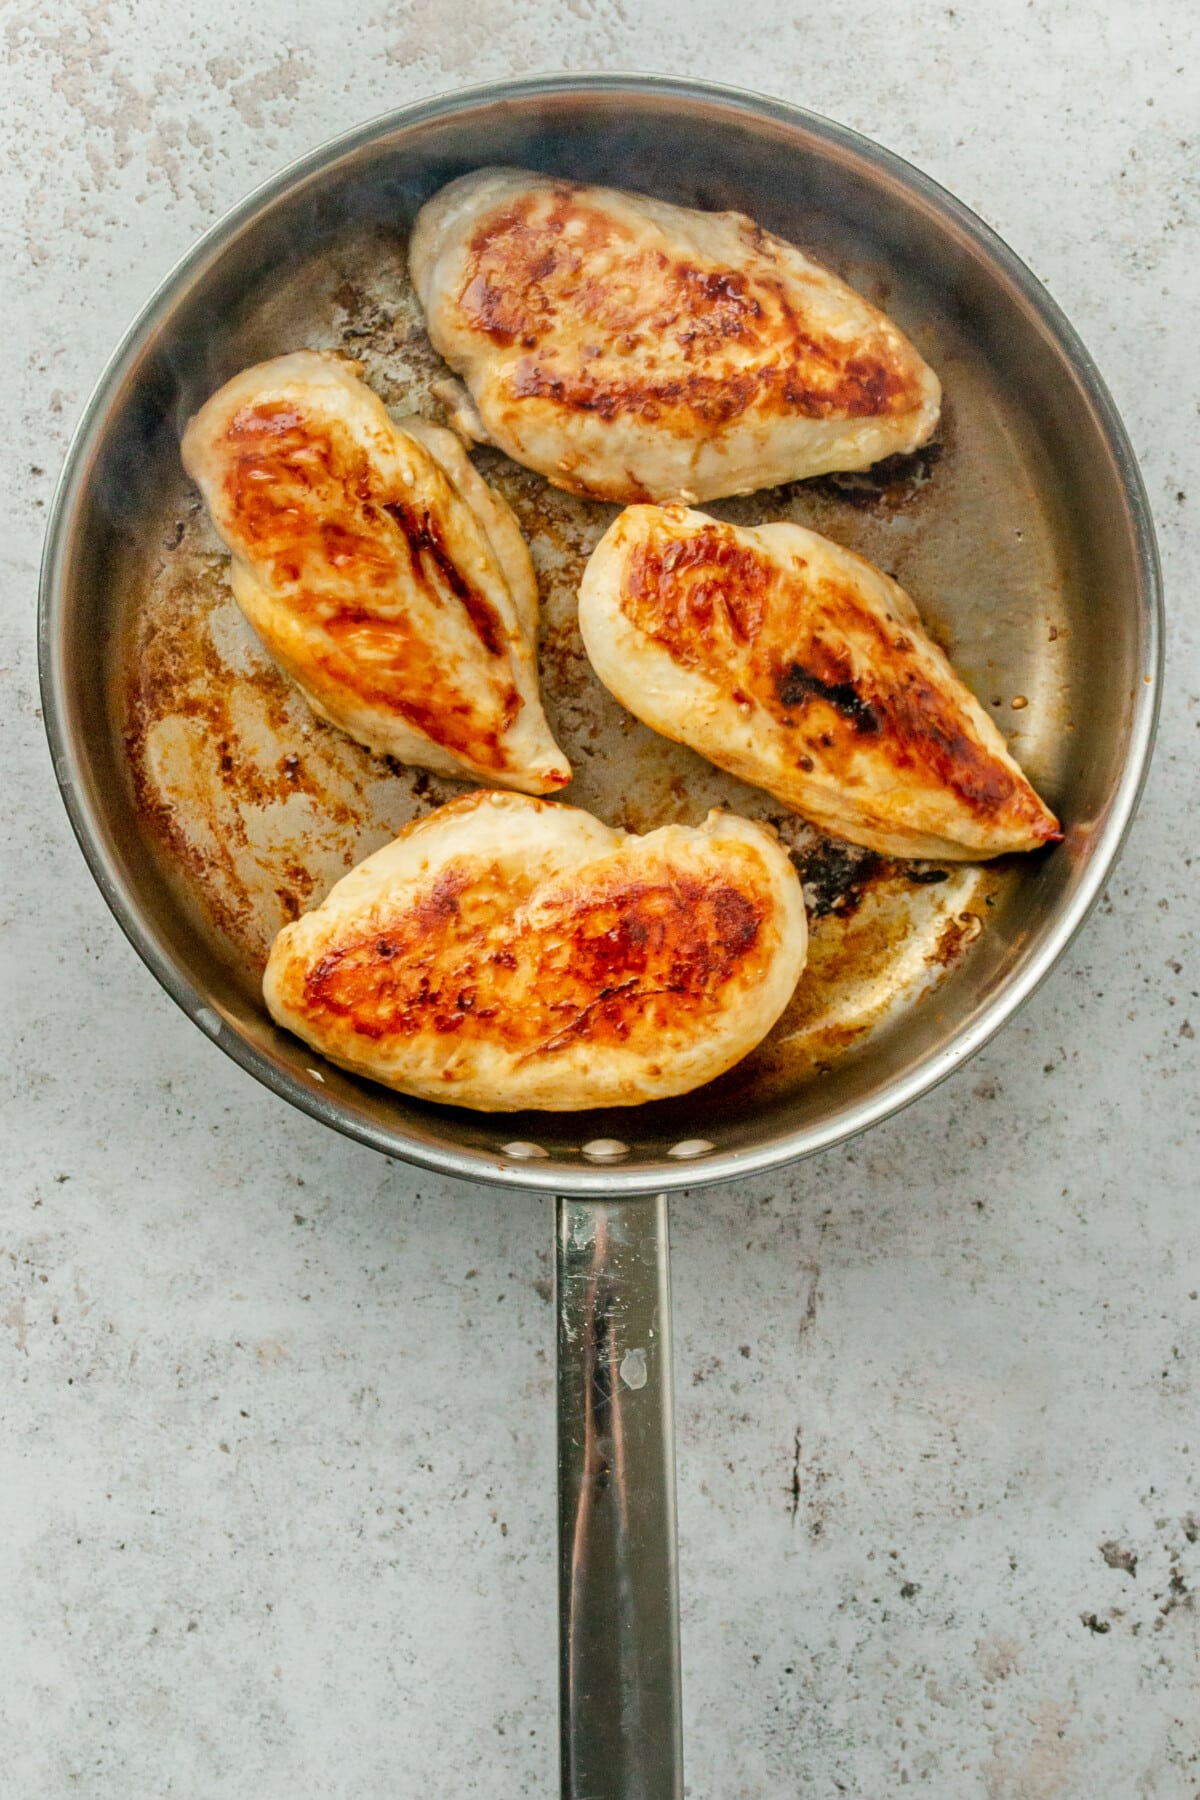 Brown cooked chicken breasts sit in a stainless steel frying pan on a light grey surface.